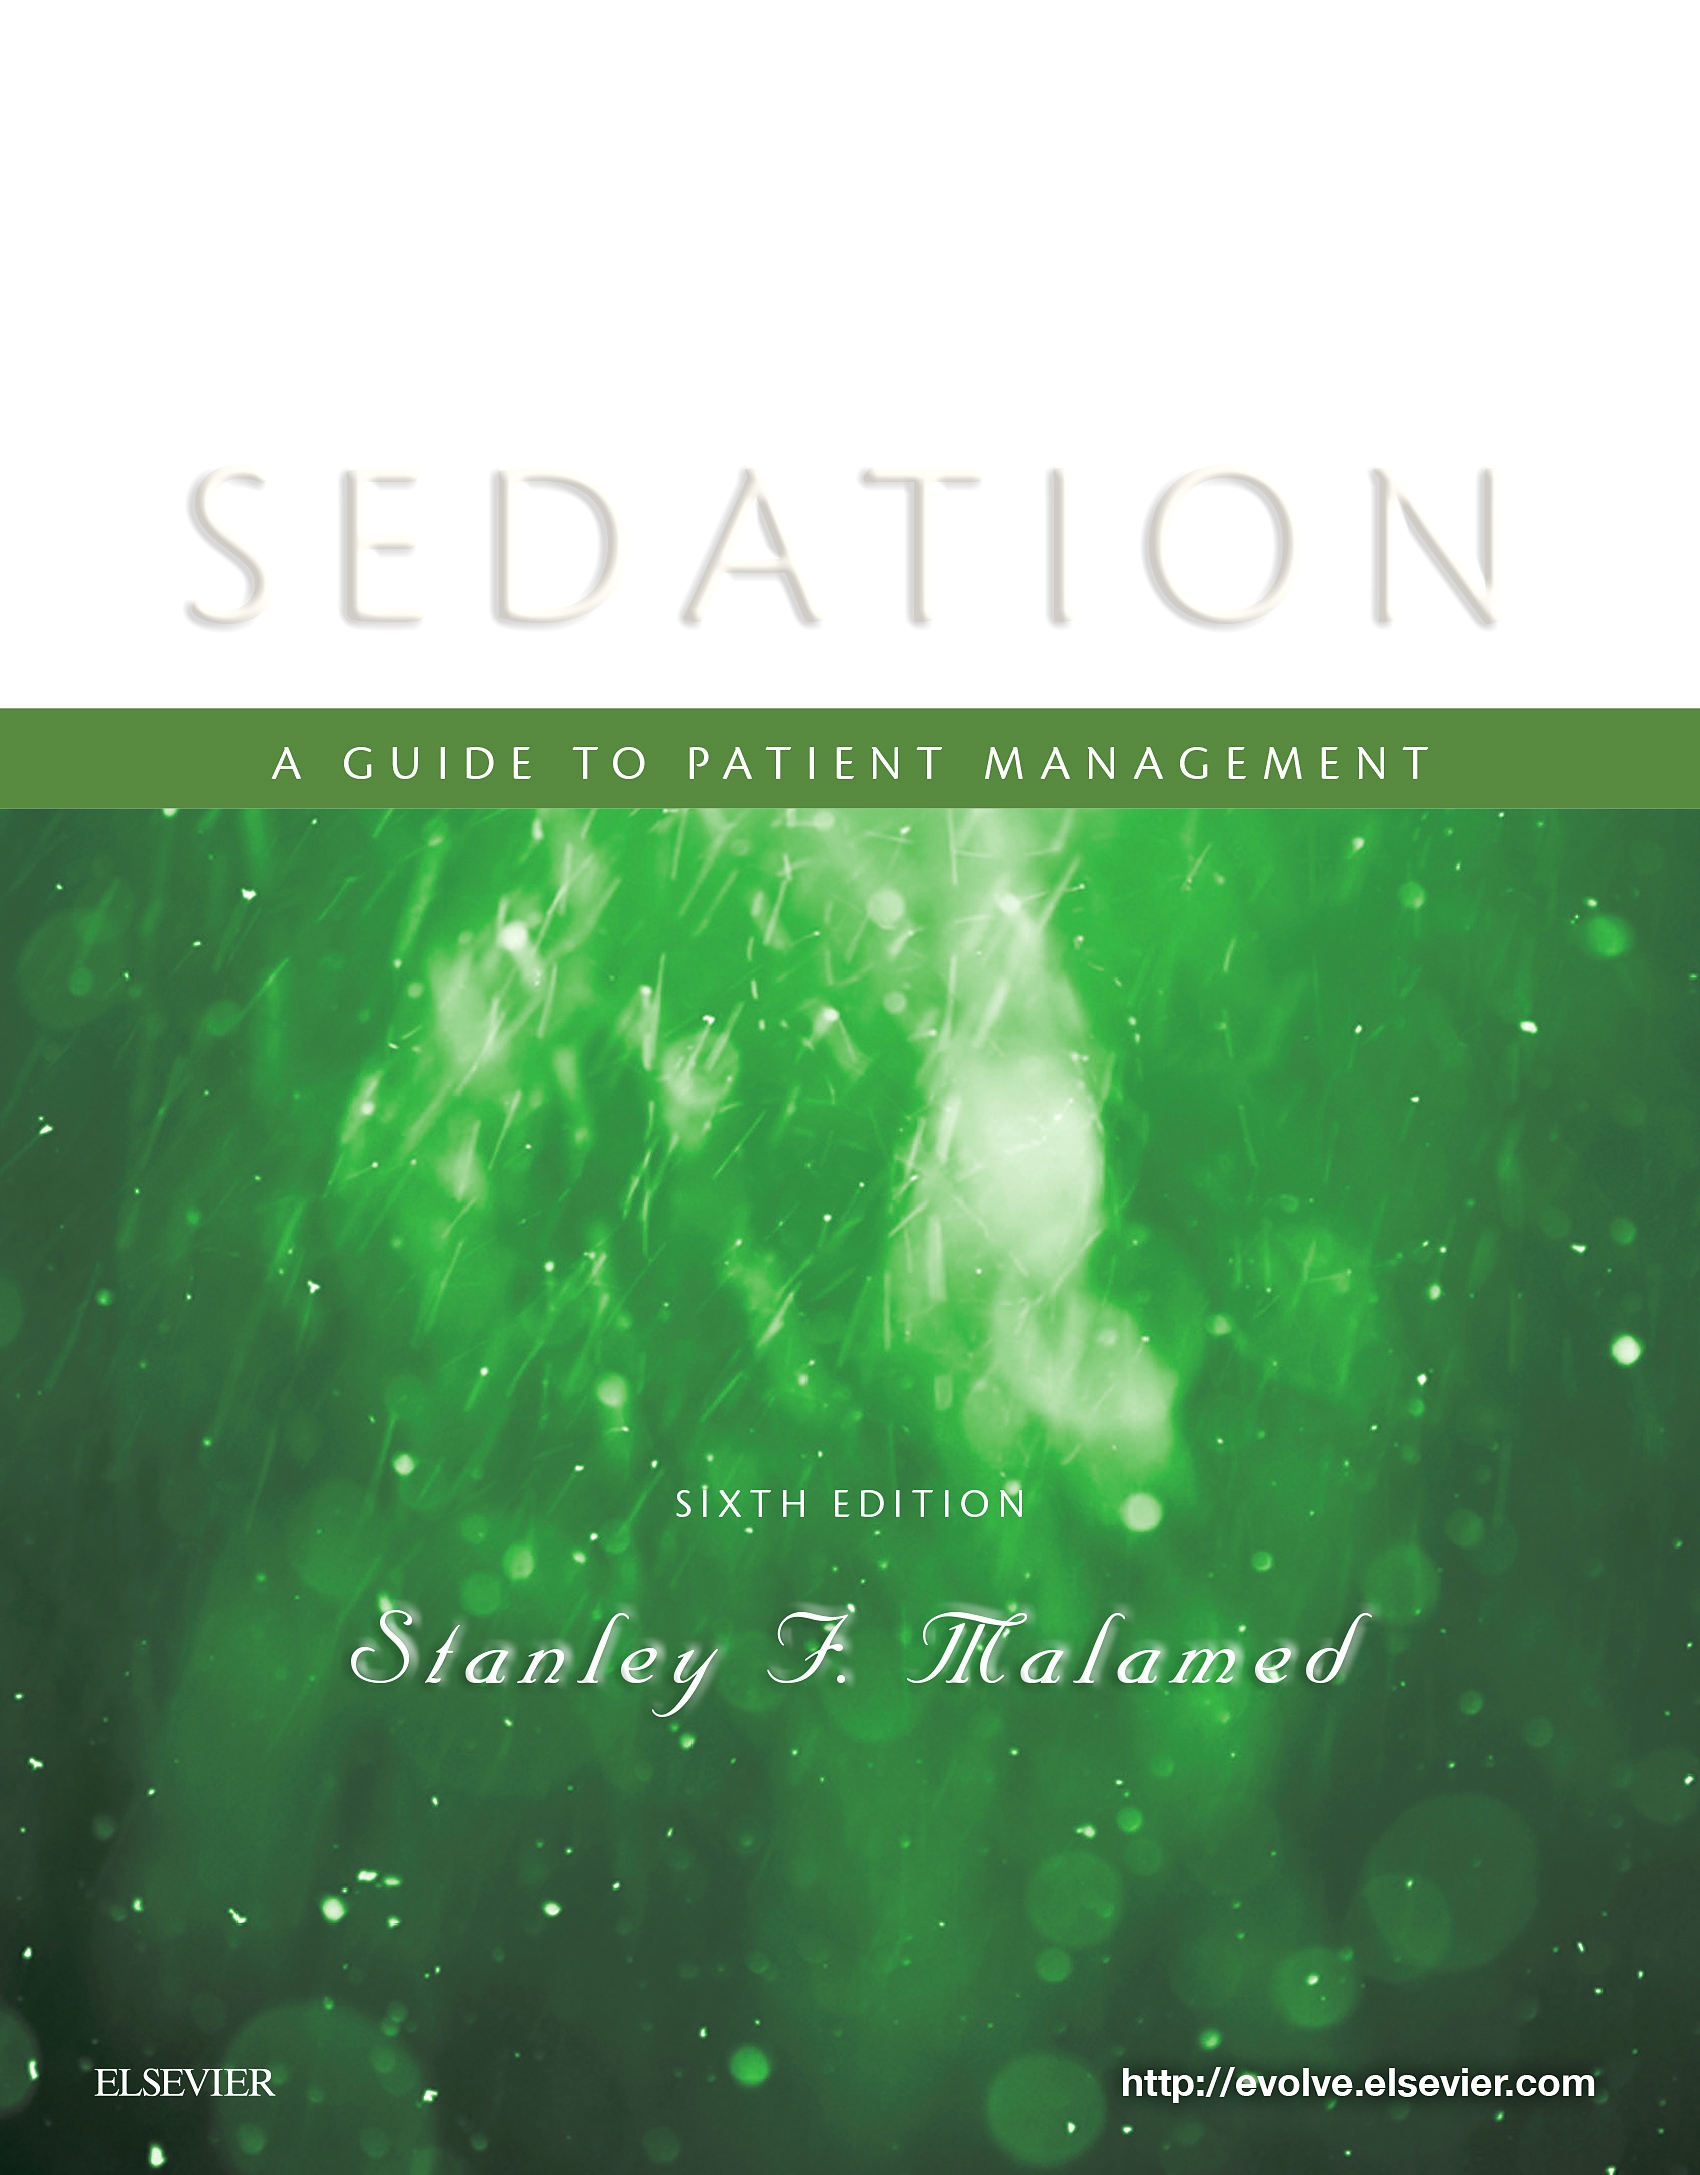 Evolve Resources for Sedation, 6th Edition